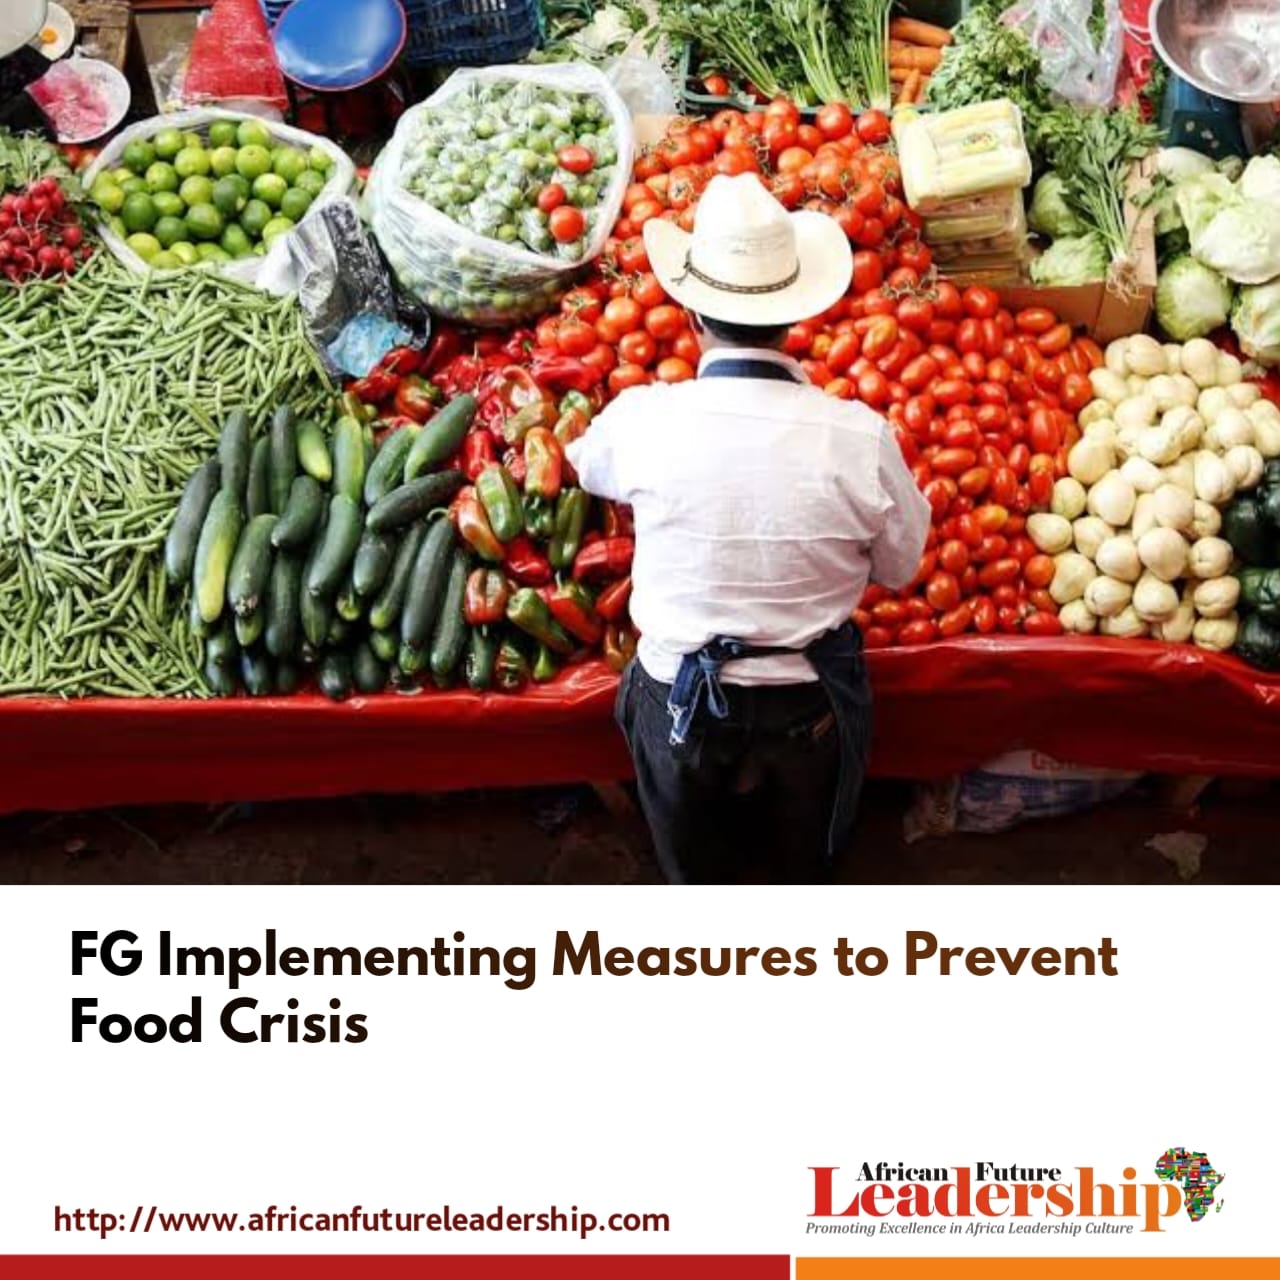 FG Implementing Measures to Prevent Food Crisis